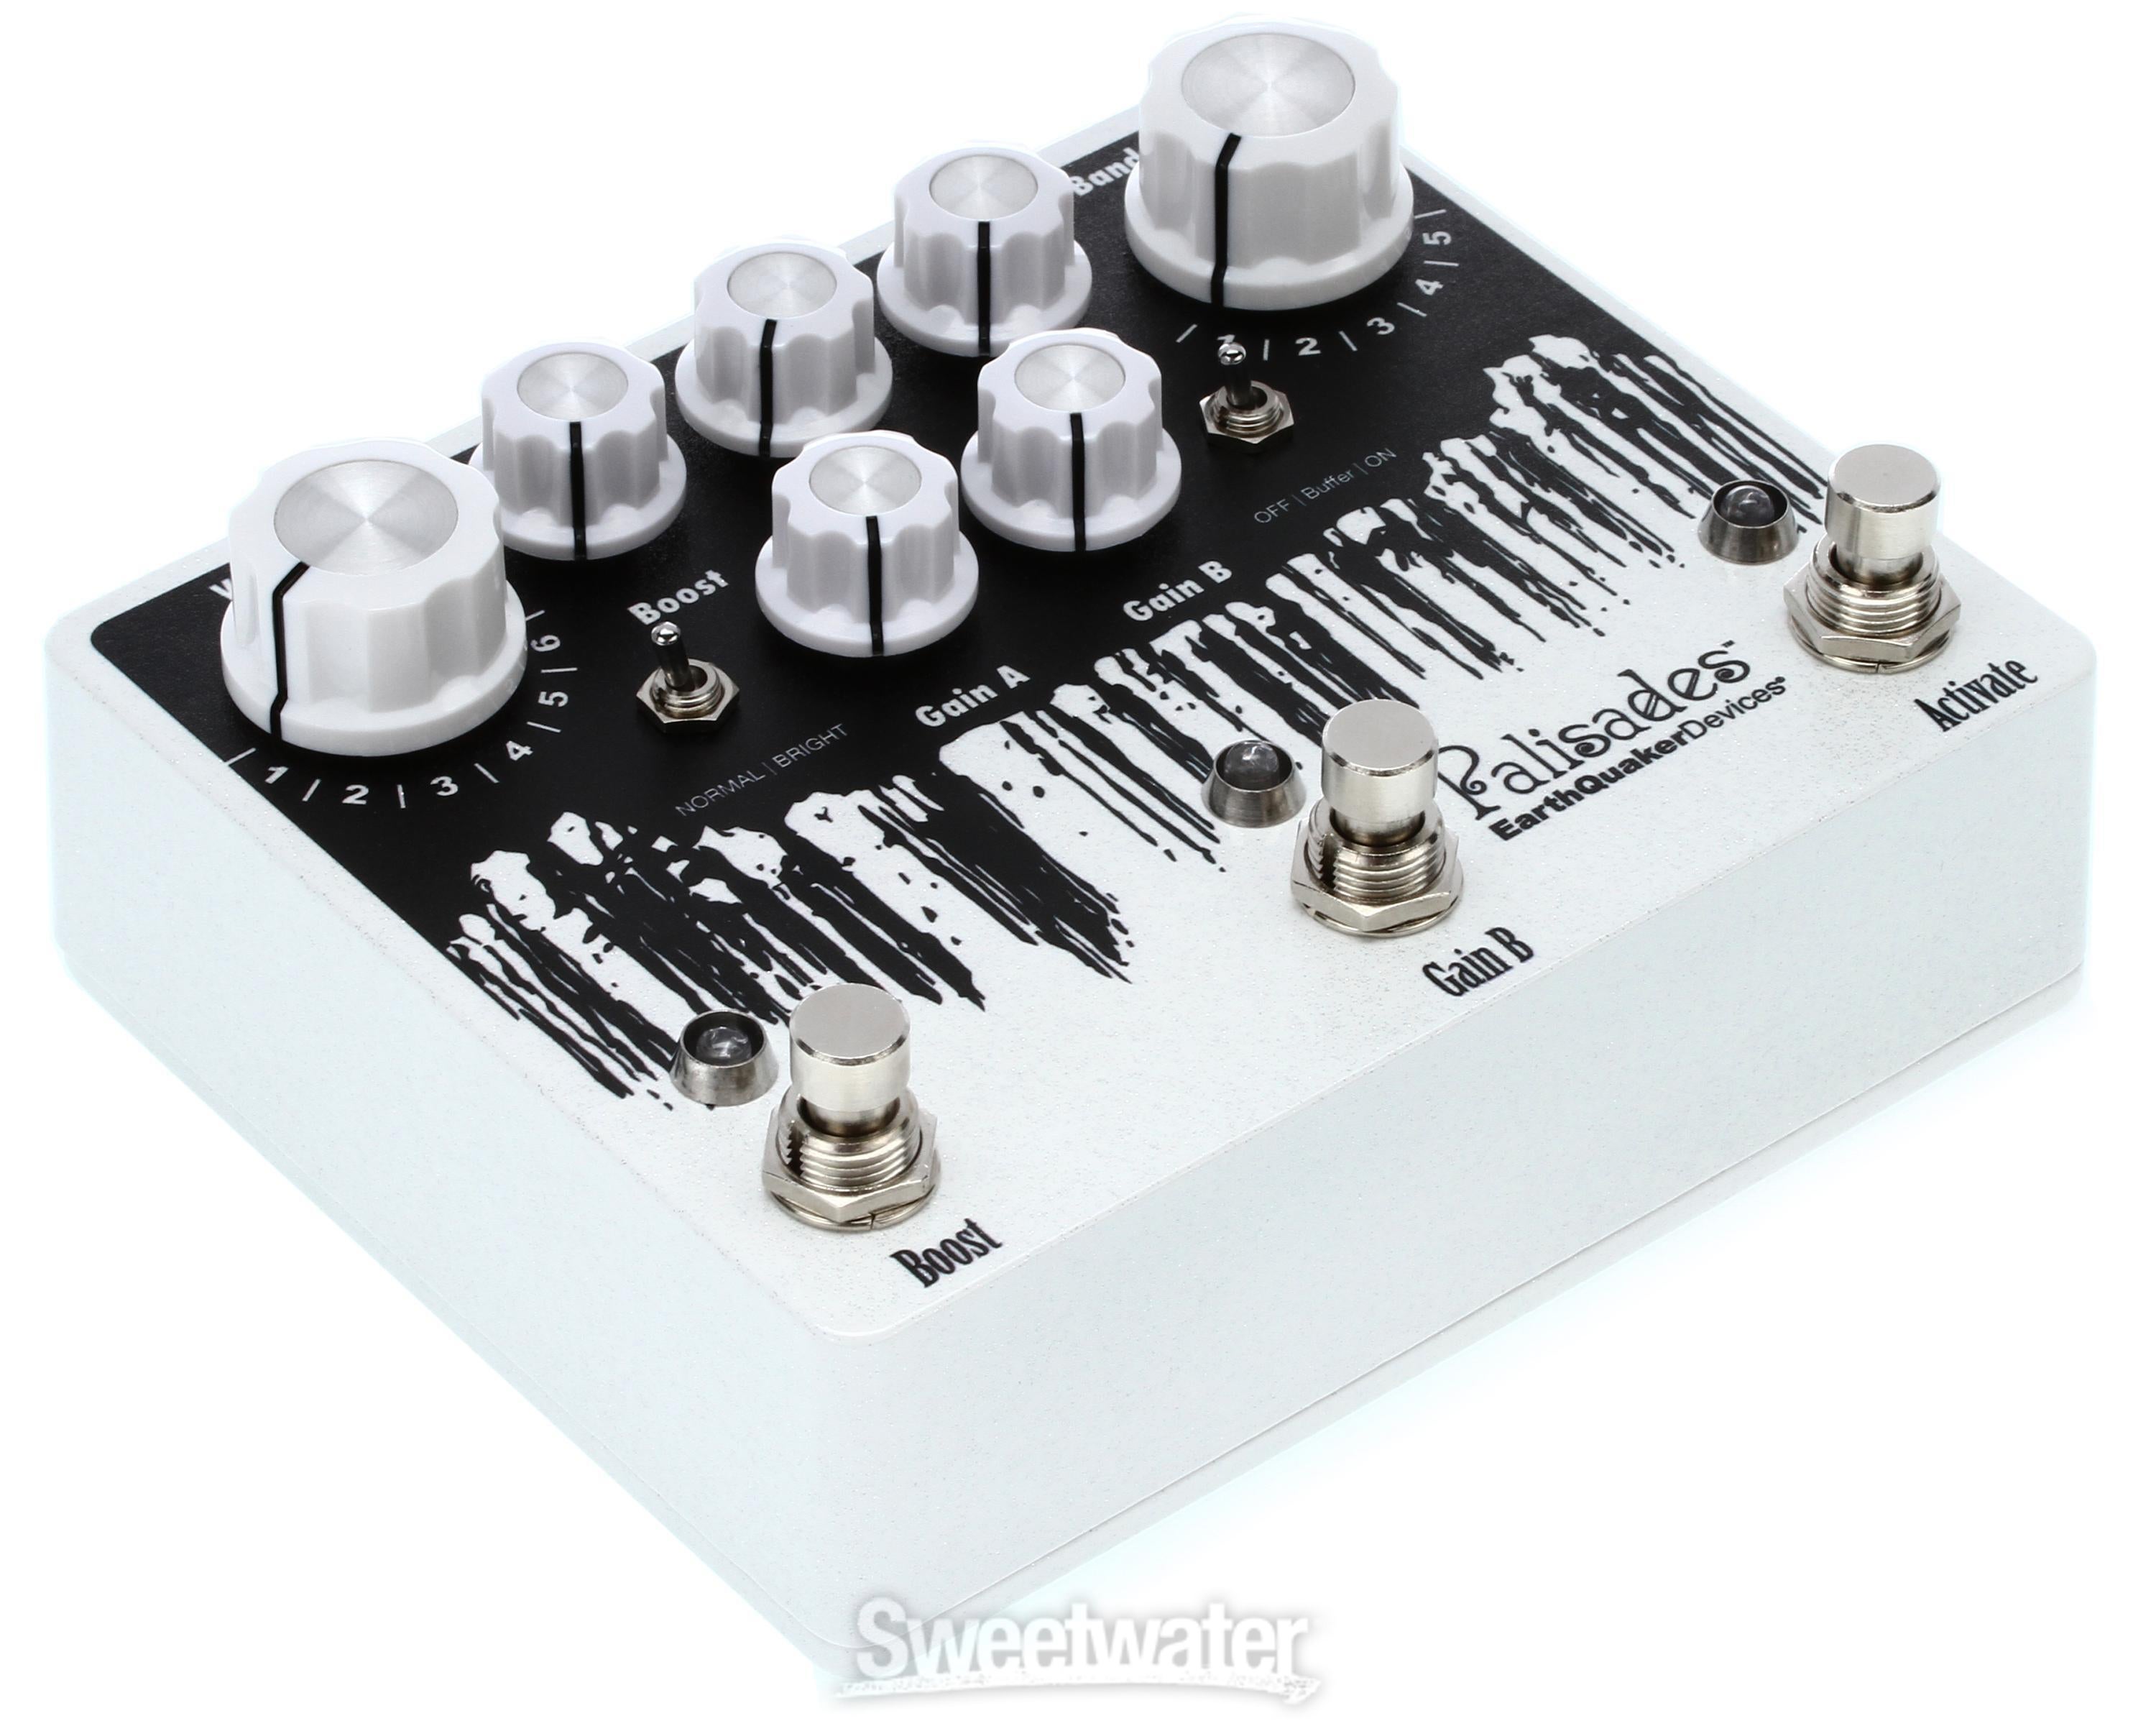 EarthQuaker Devices Palisades V2 Overdrive Pedal | Sweetwater